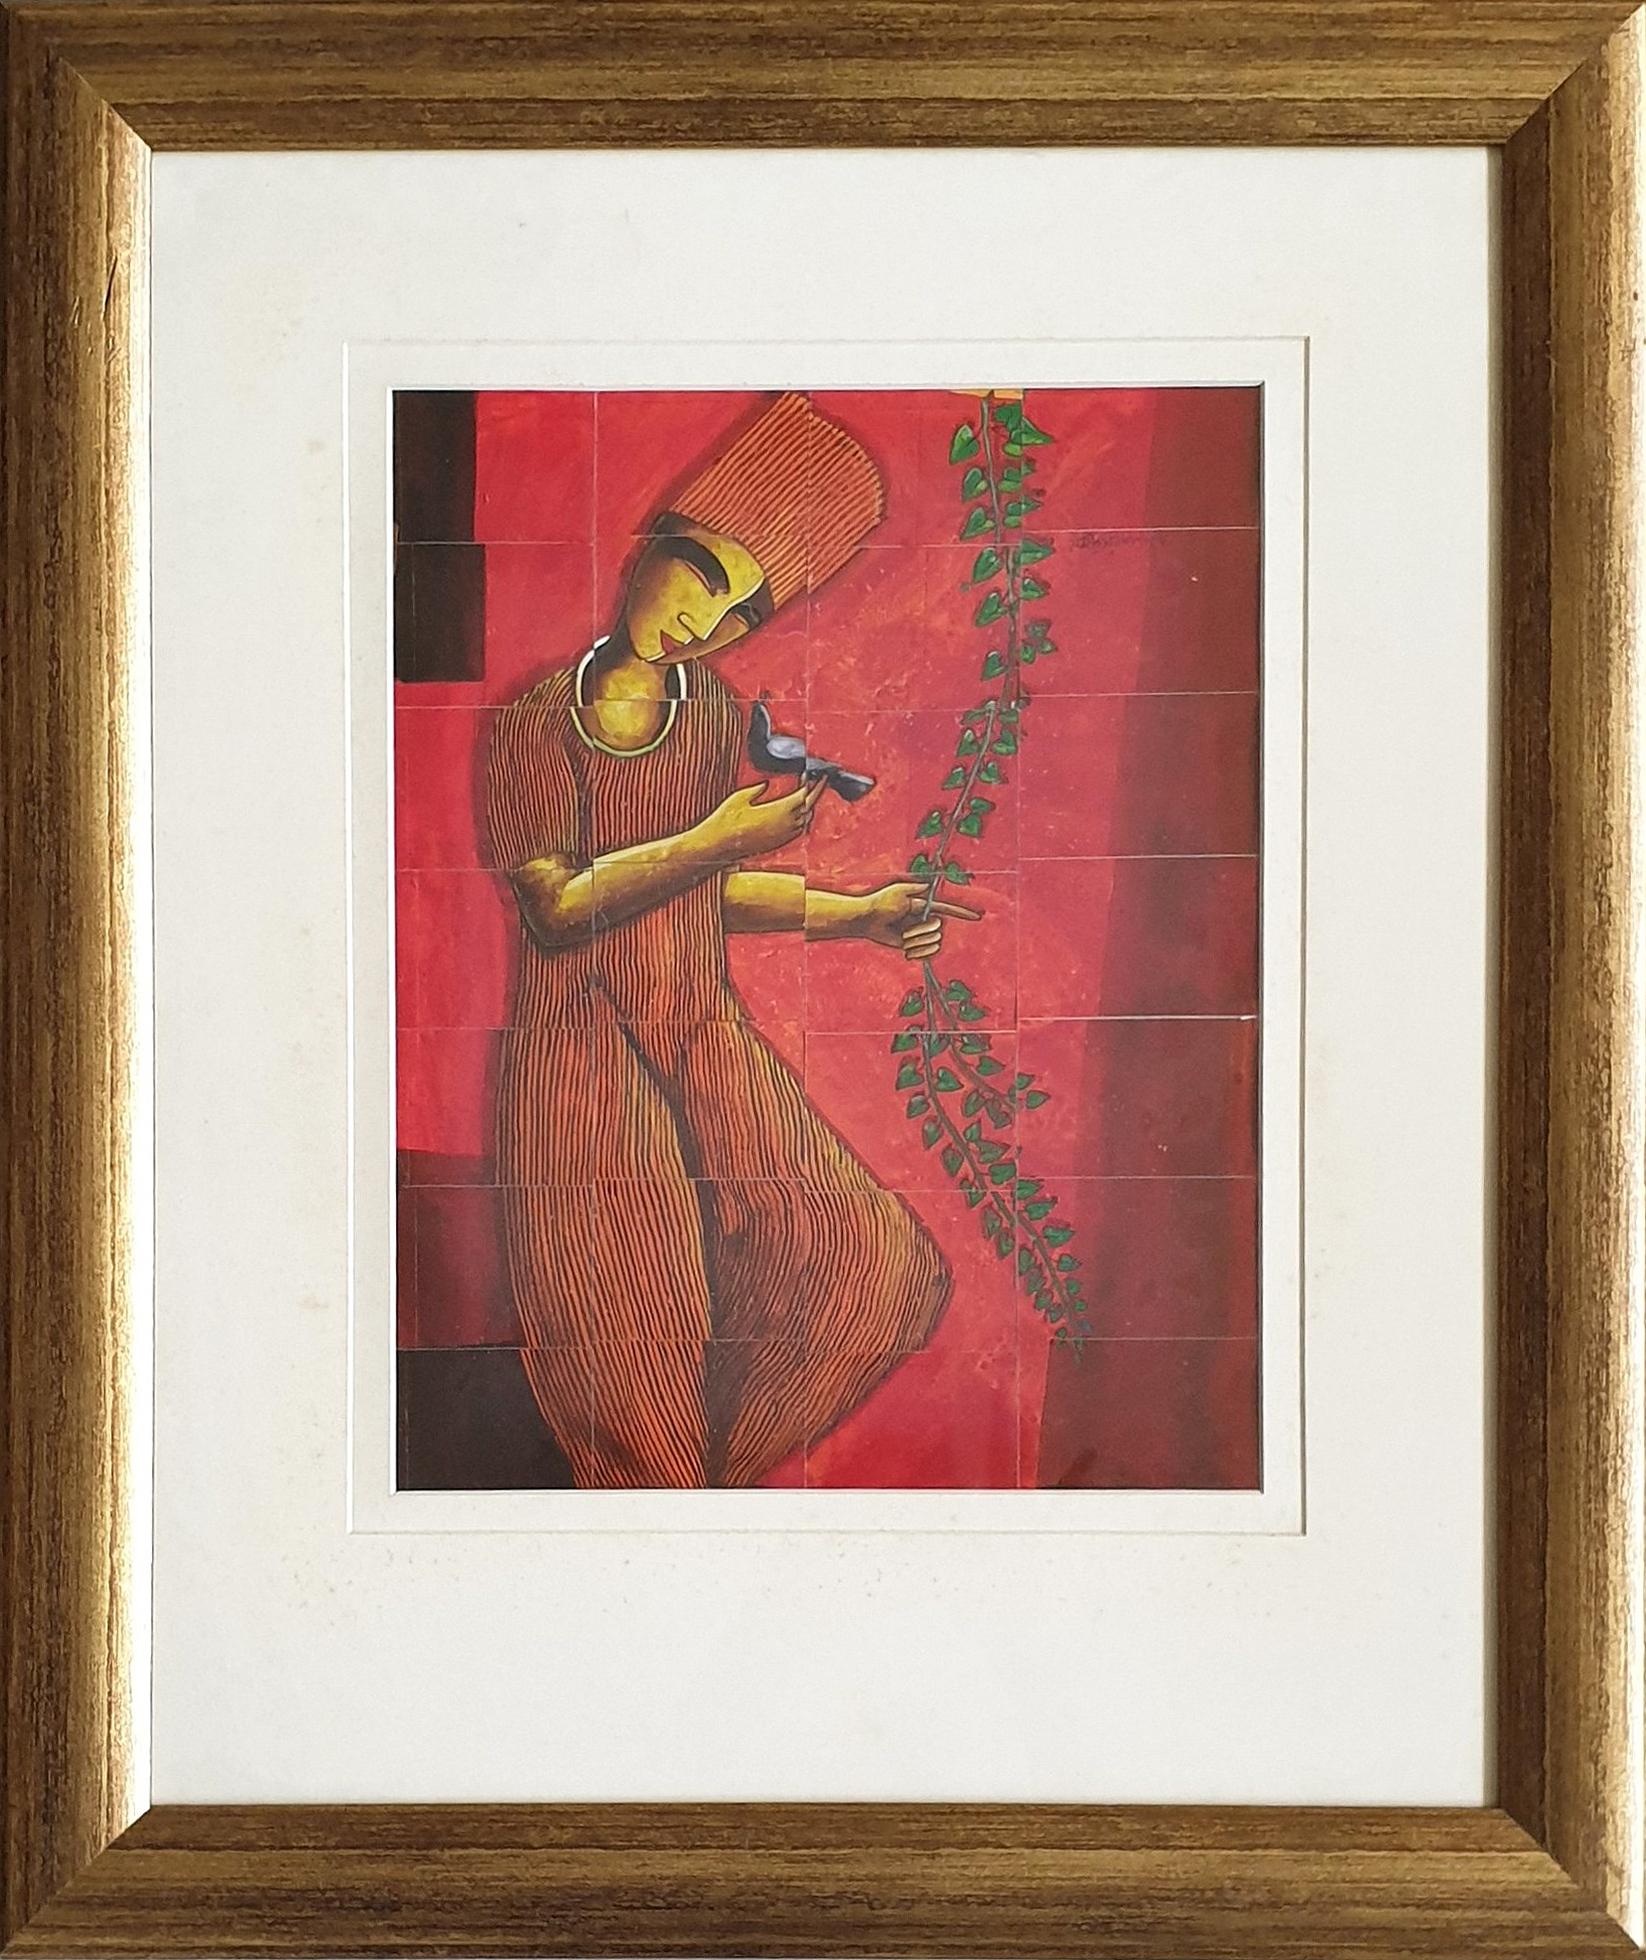 Samir Sarkar Figurative Painting - Decorator, Acrylic on Stripped Board, Red, Green, Contemporary Artist "In Stock"